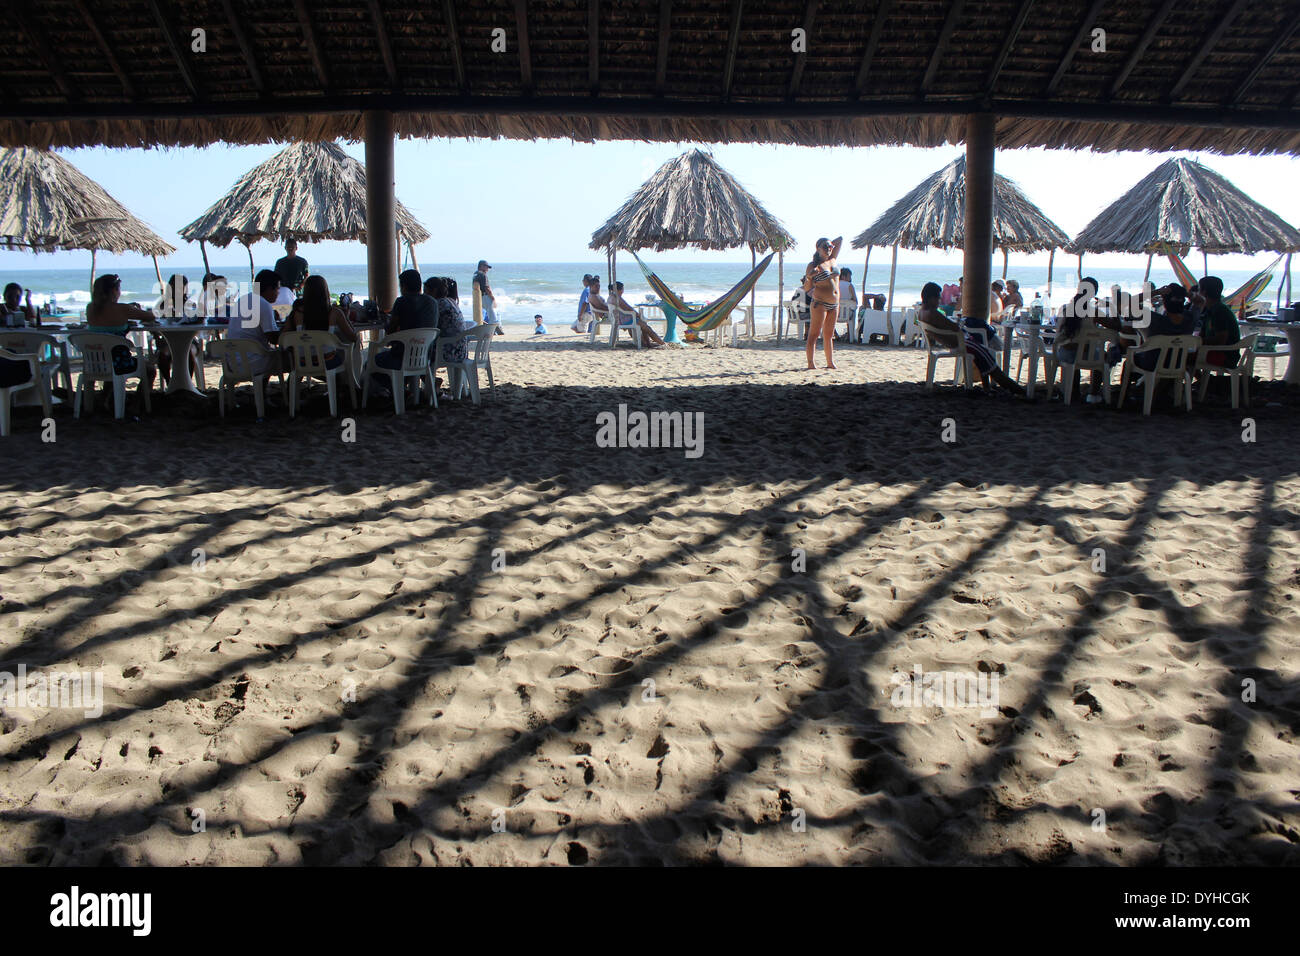 Shadows on sand along the beach front with palm-roofed shades and hammocks, Barra Vieja, Acapulco, Mexico Stock Photo